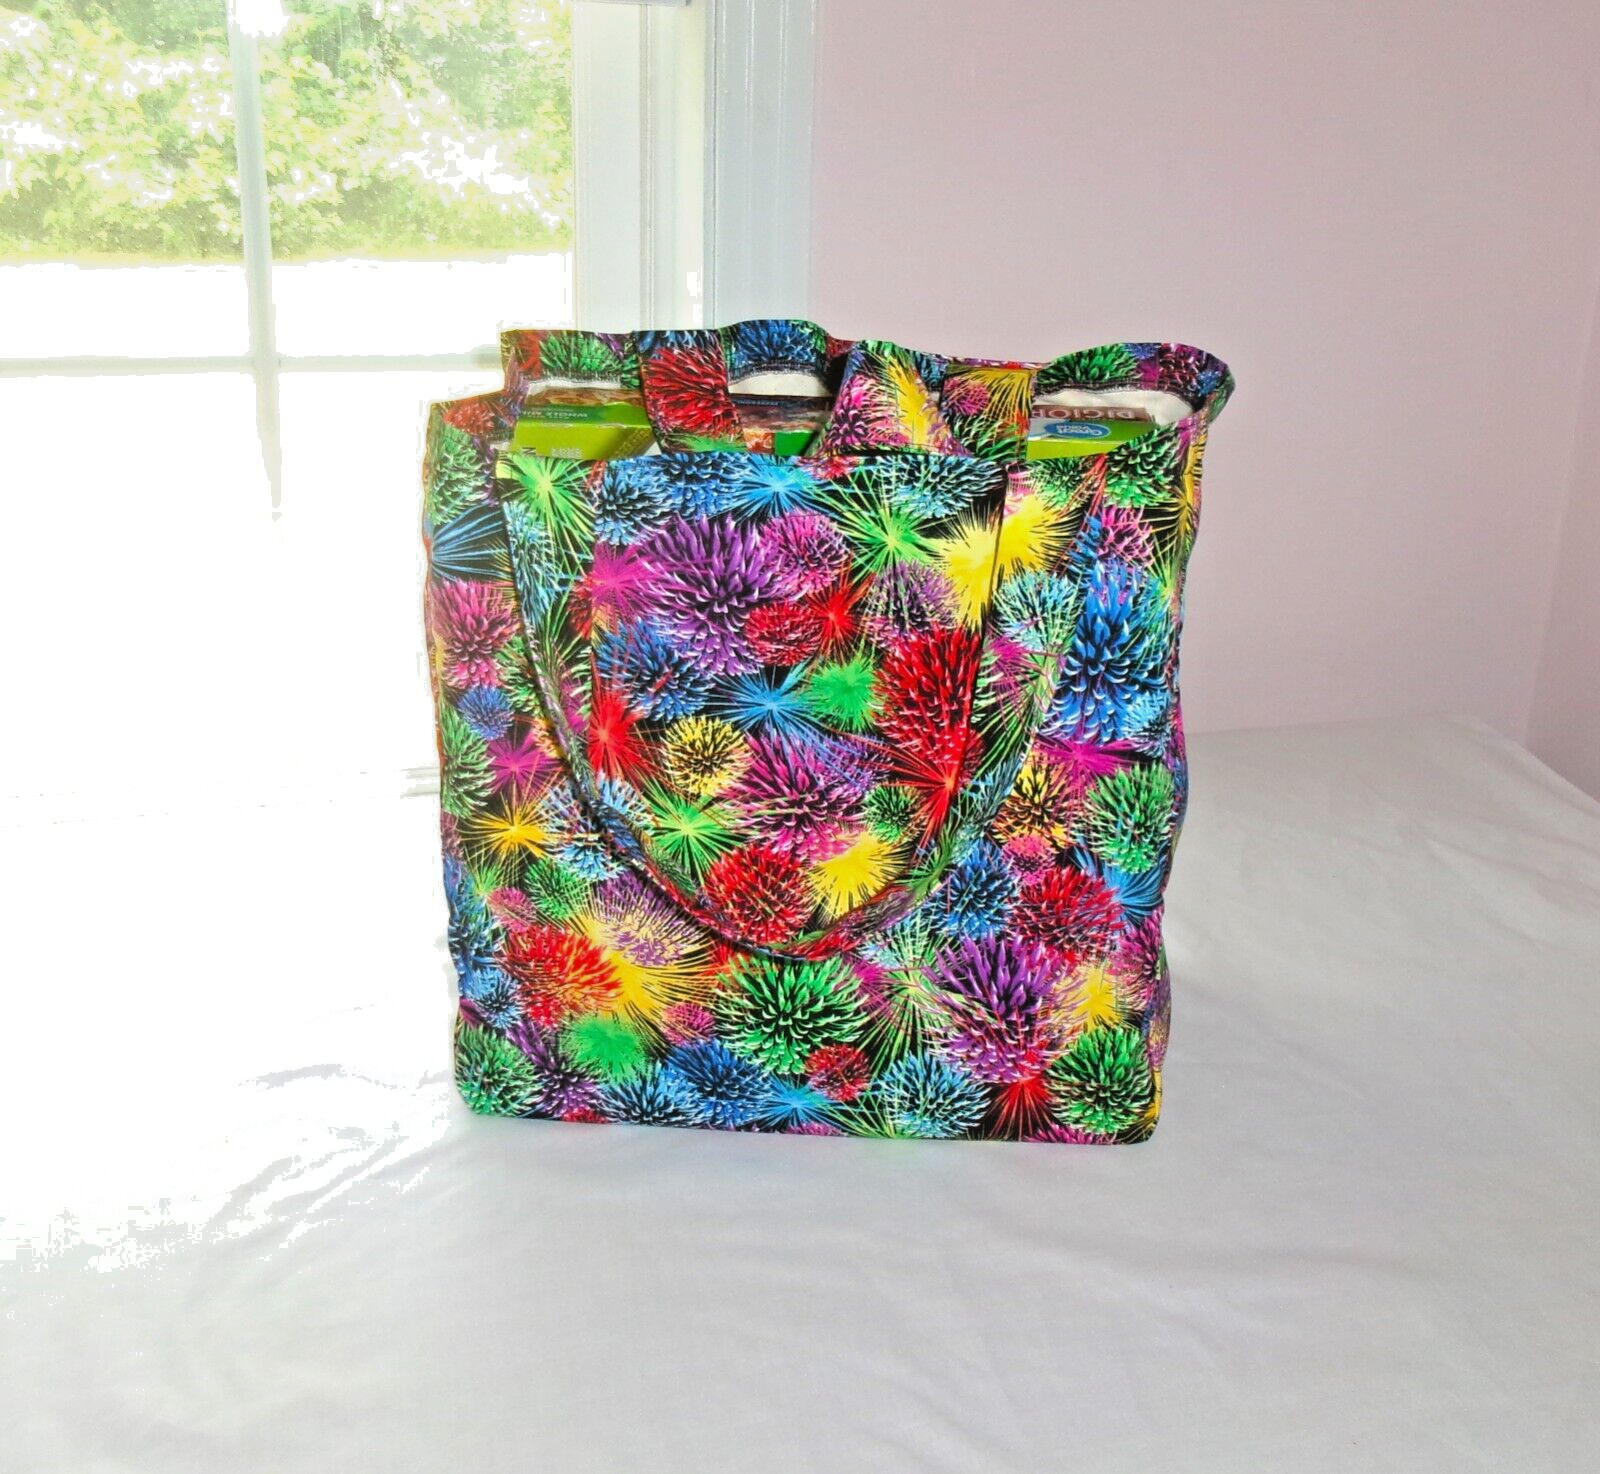 NEW HANDMADE COTTON FOLDING MULTIUSE TOTE BAG BRIGHT COLORFULL FIRE WORKS